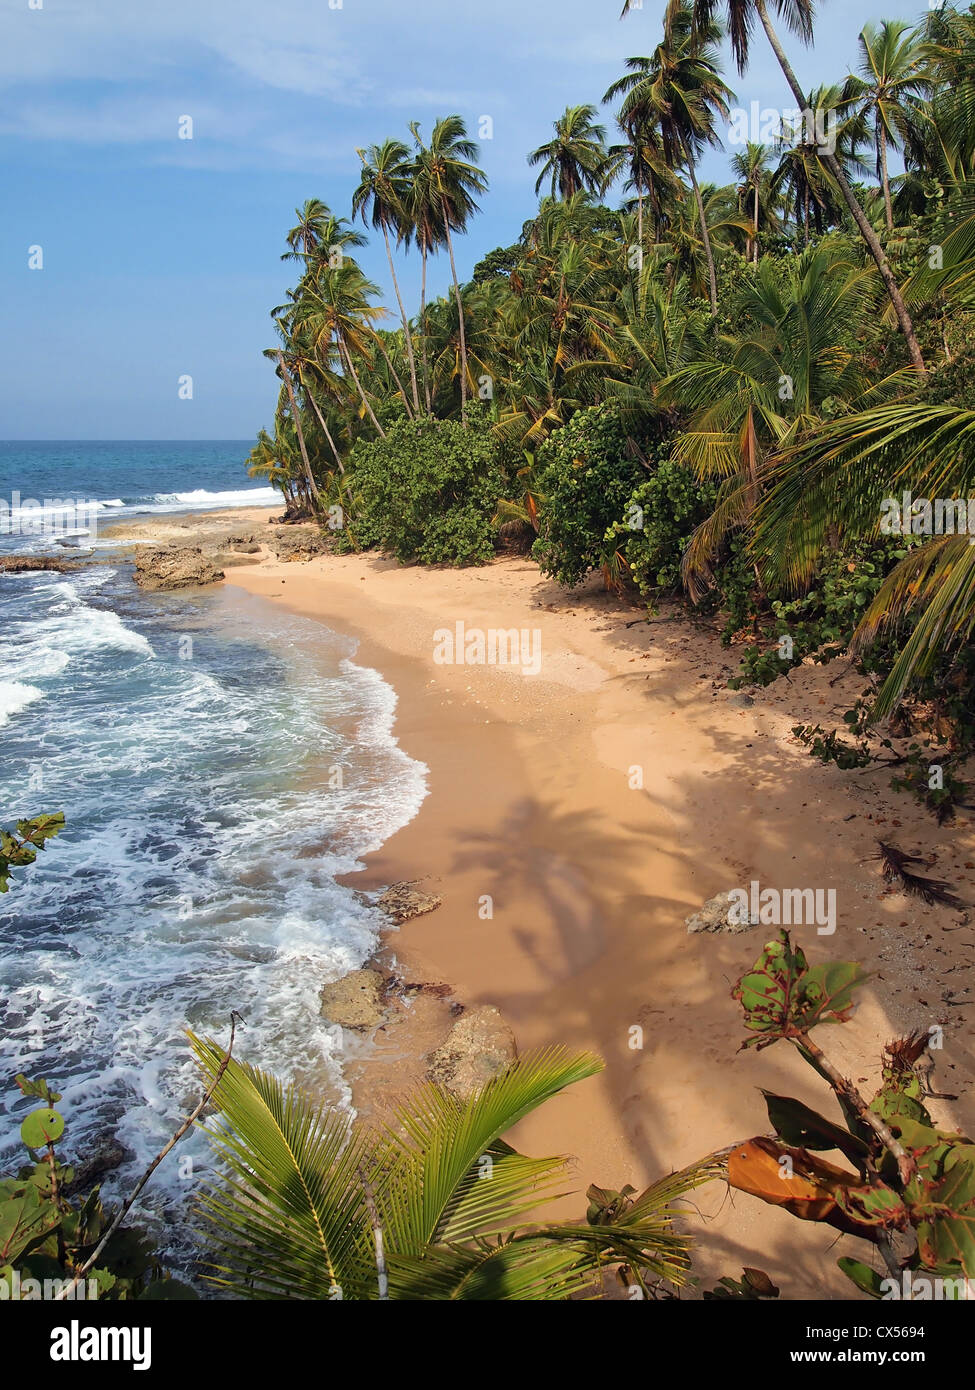 Coconut tree shade on the sand of a wild tropical beach, Costa Rica, Central America Stock Photo